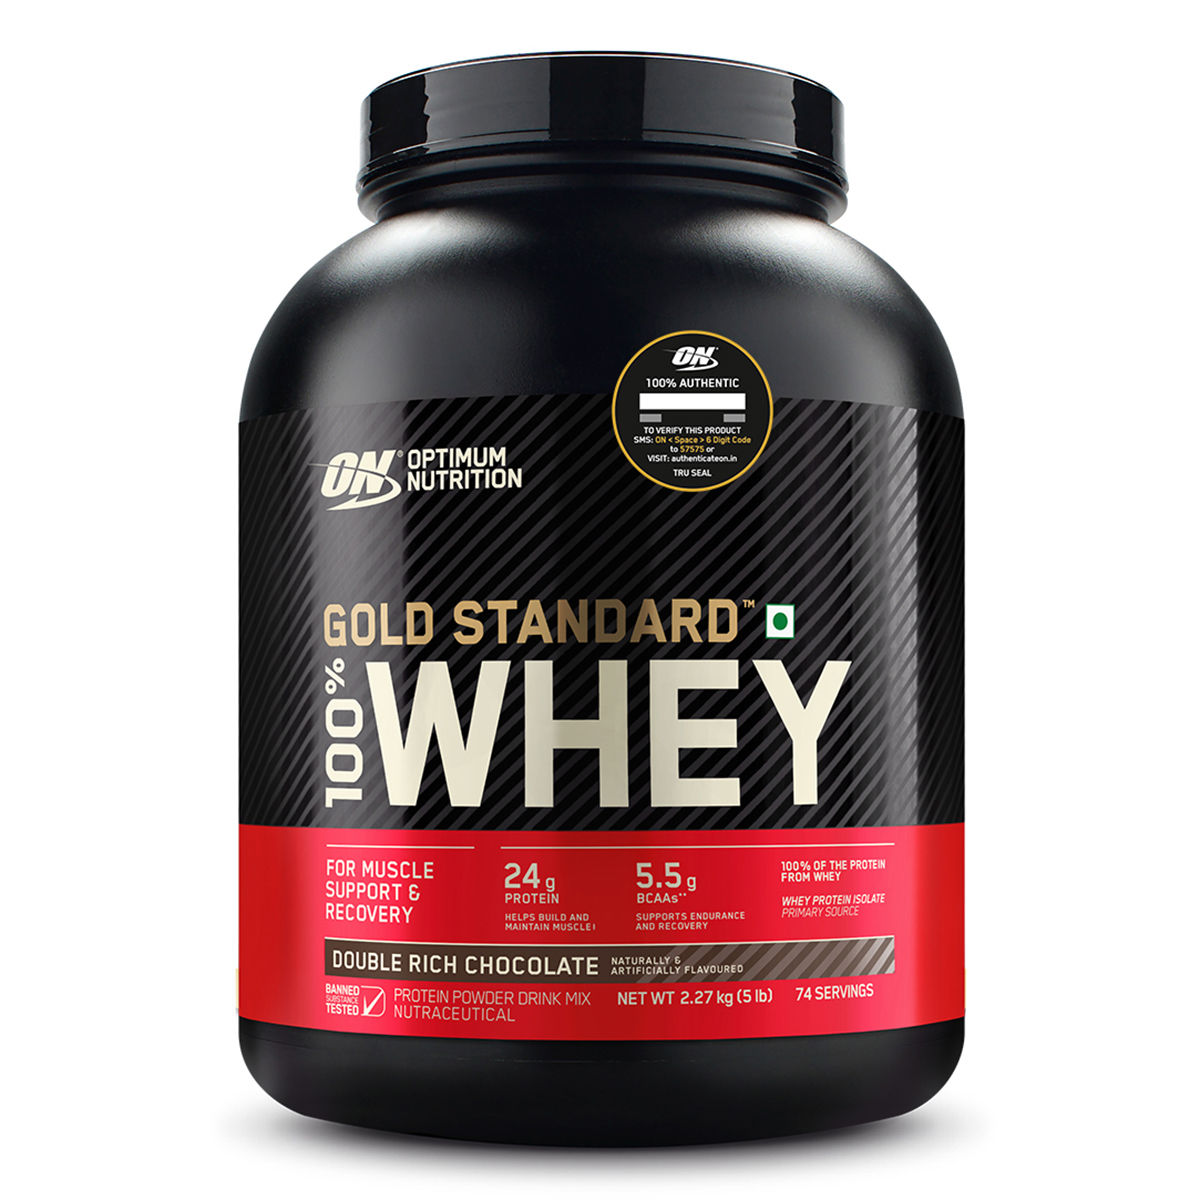 Buy Optimum Nutrition (ON) Gold Standard 100% Whey Protein Double Rich Chocolate Flavour Powder, 5 lb Online